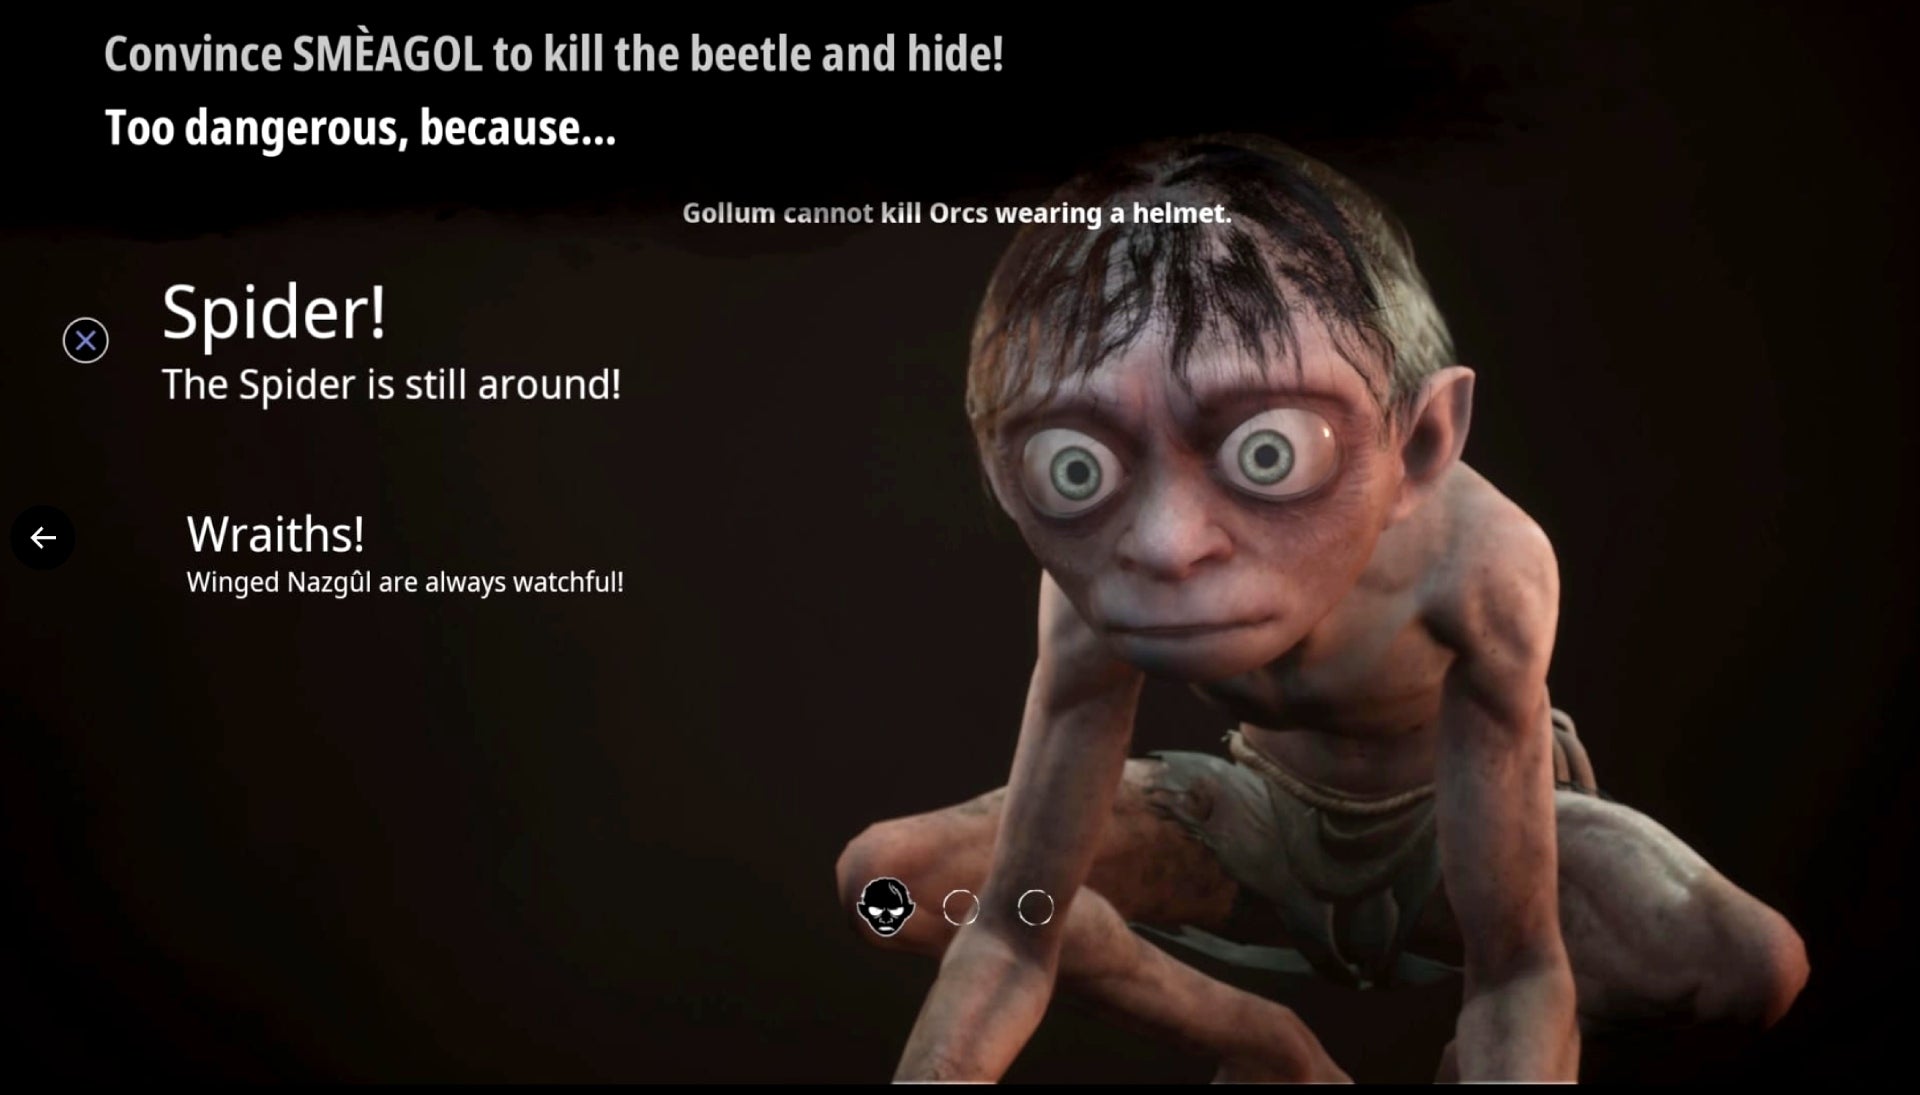  The Lord of the Rings: Gollum (NSW) : Maximum Games